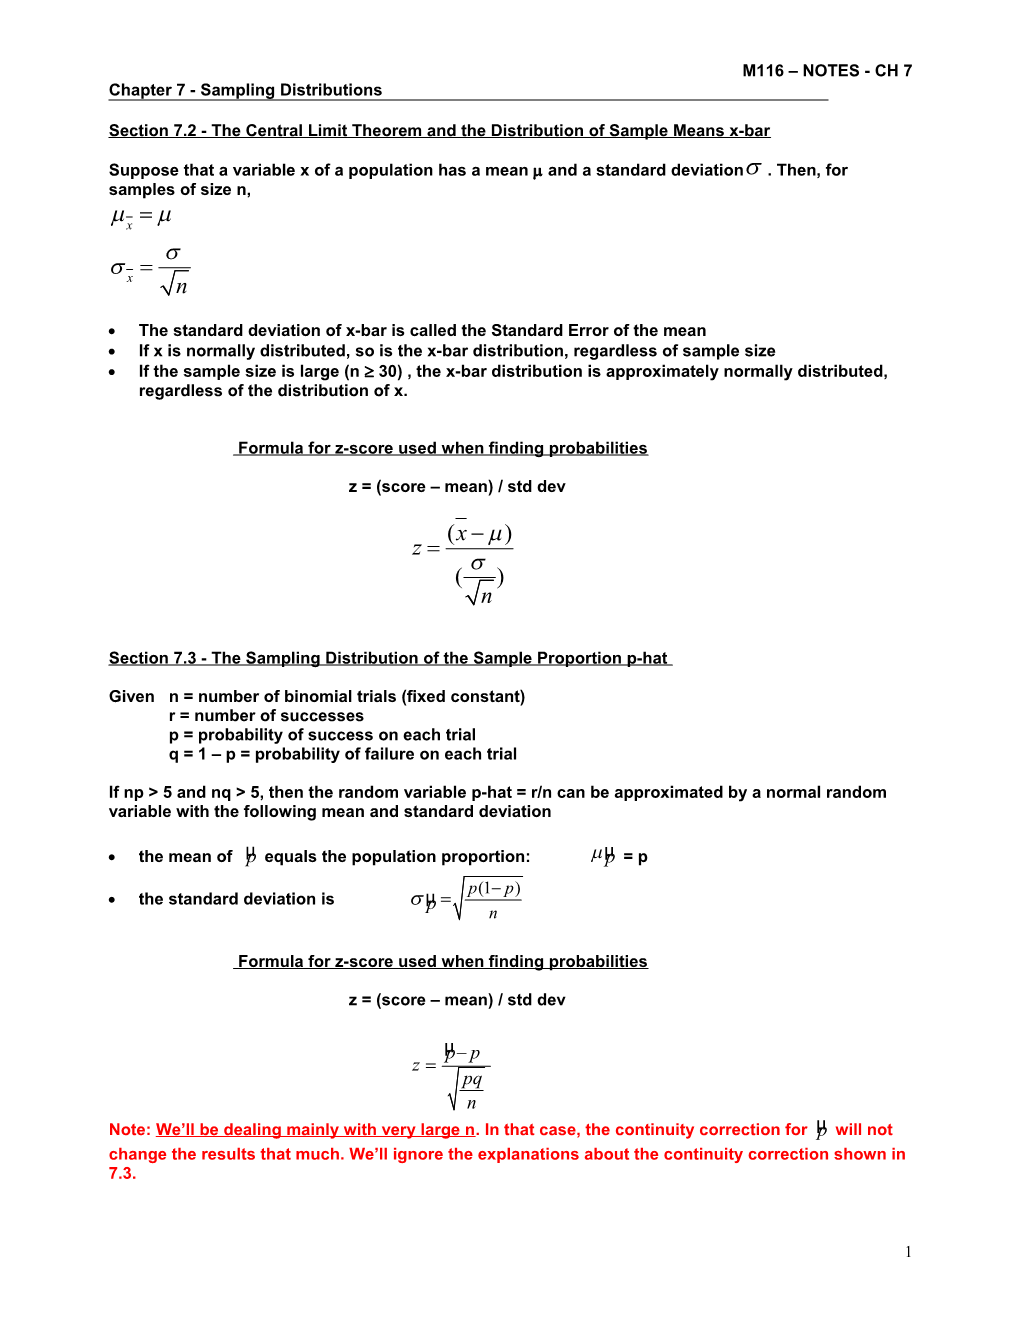 Section 7.2 - the Central Limit Theorem and the Distribution of Sample Means X-Bar